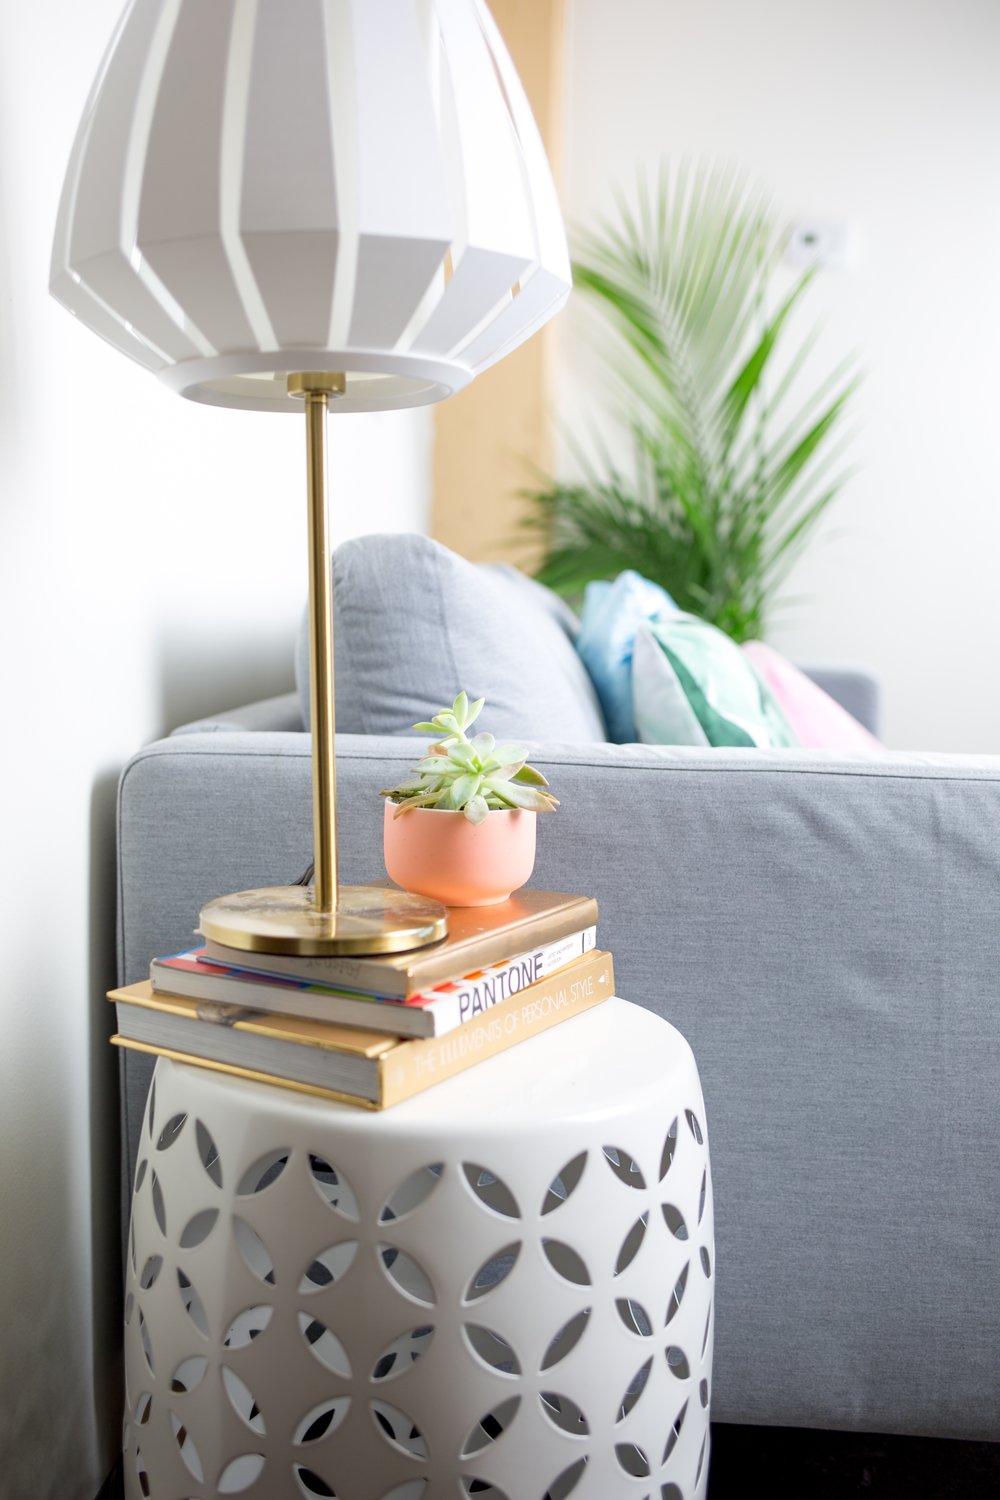  Utilized a white garden stool (another gem from Studio DIY's studio sale) as a side table and gave it some extra height with some of my favorite coffee table reads. 